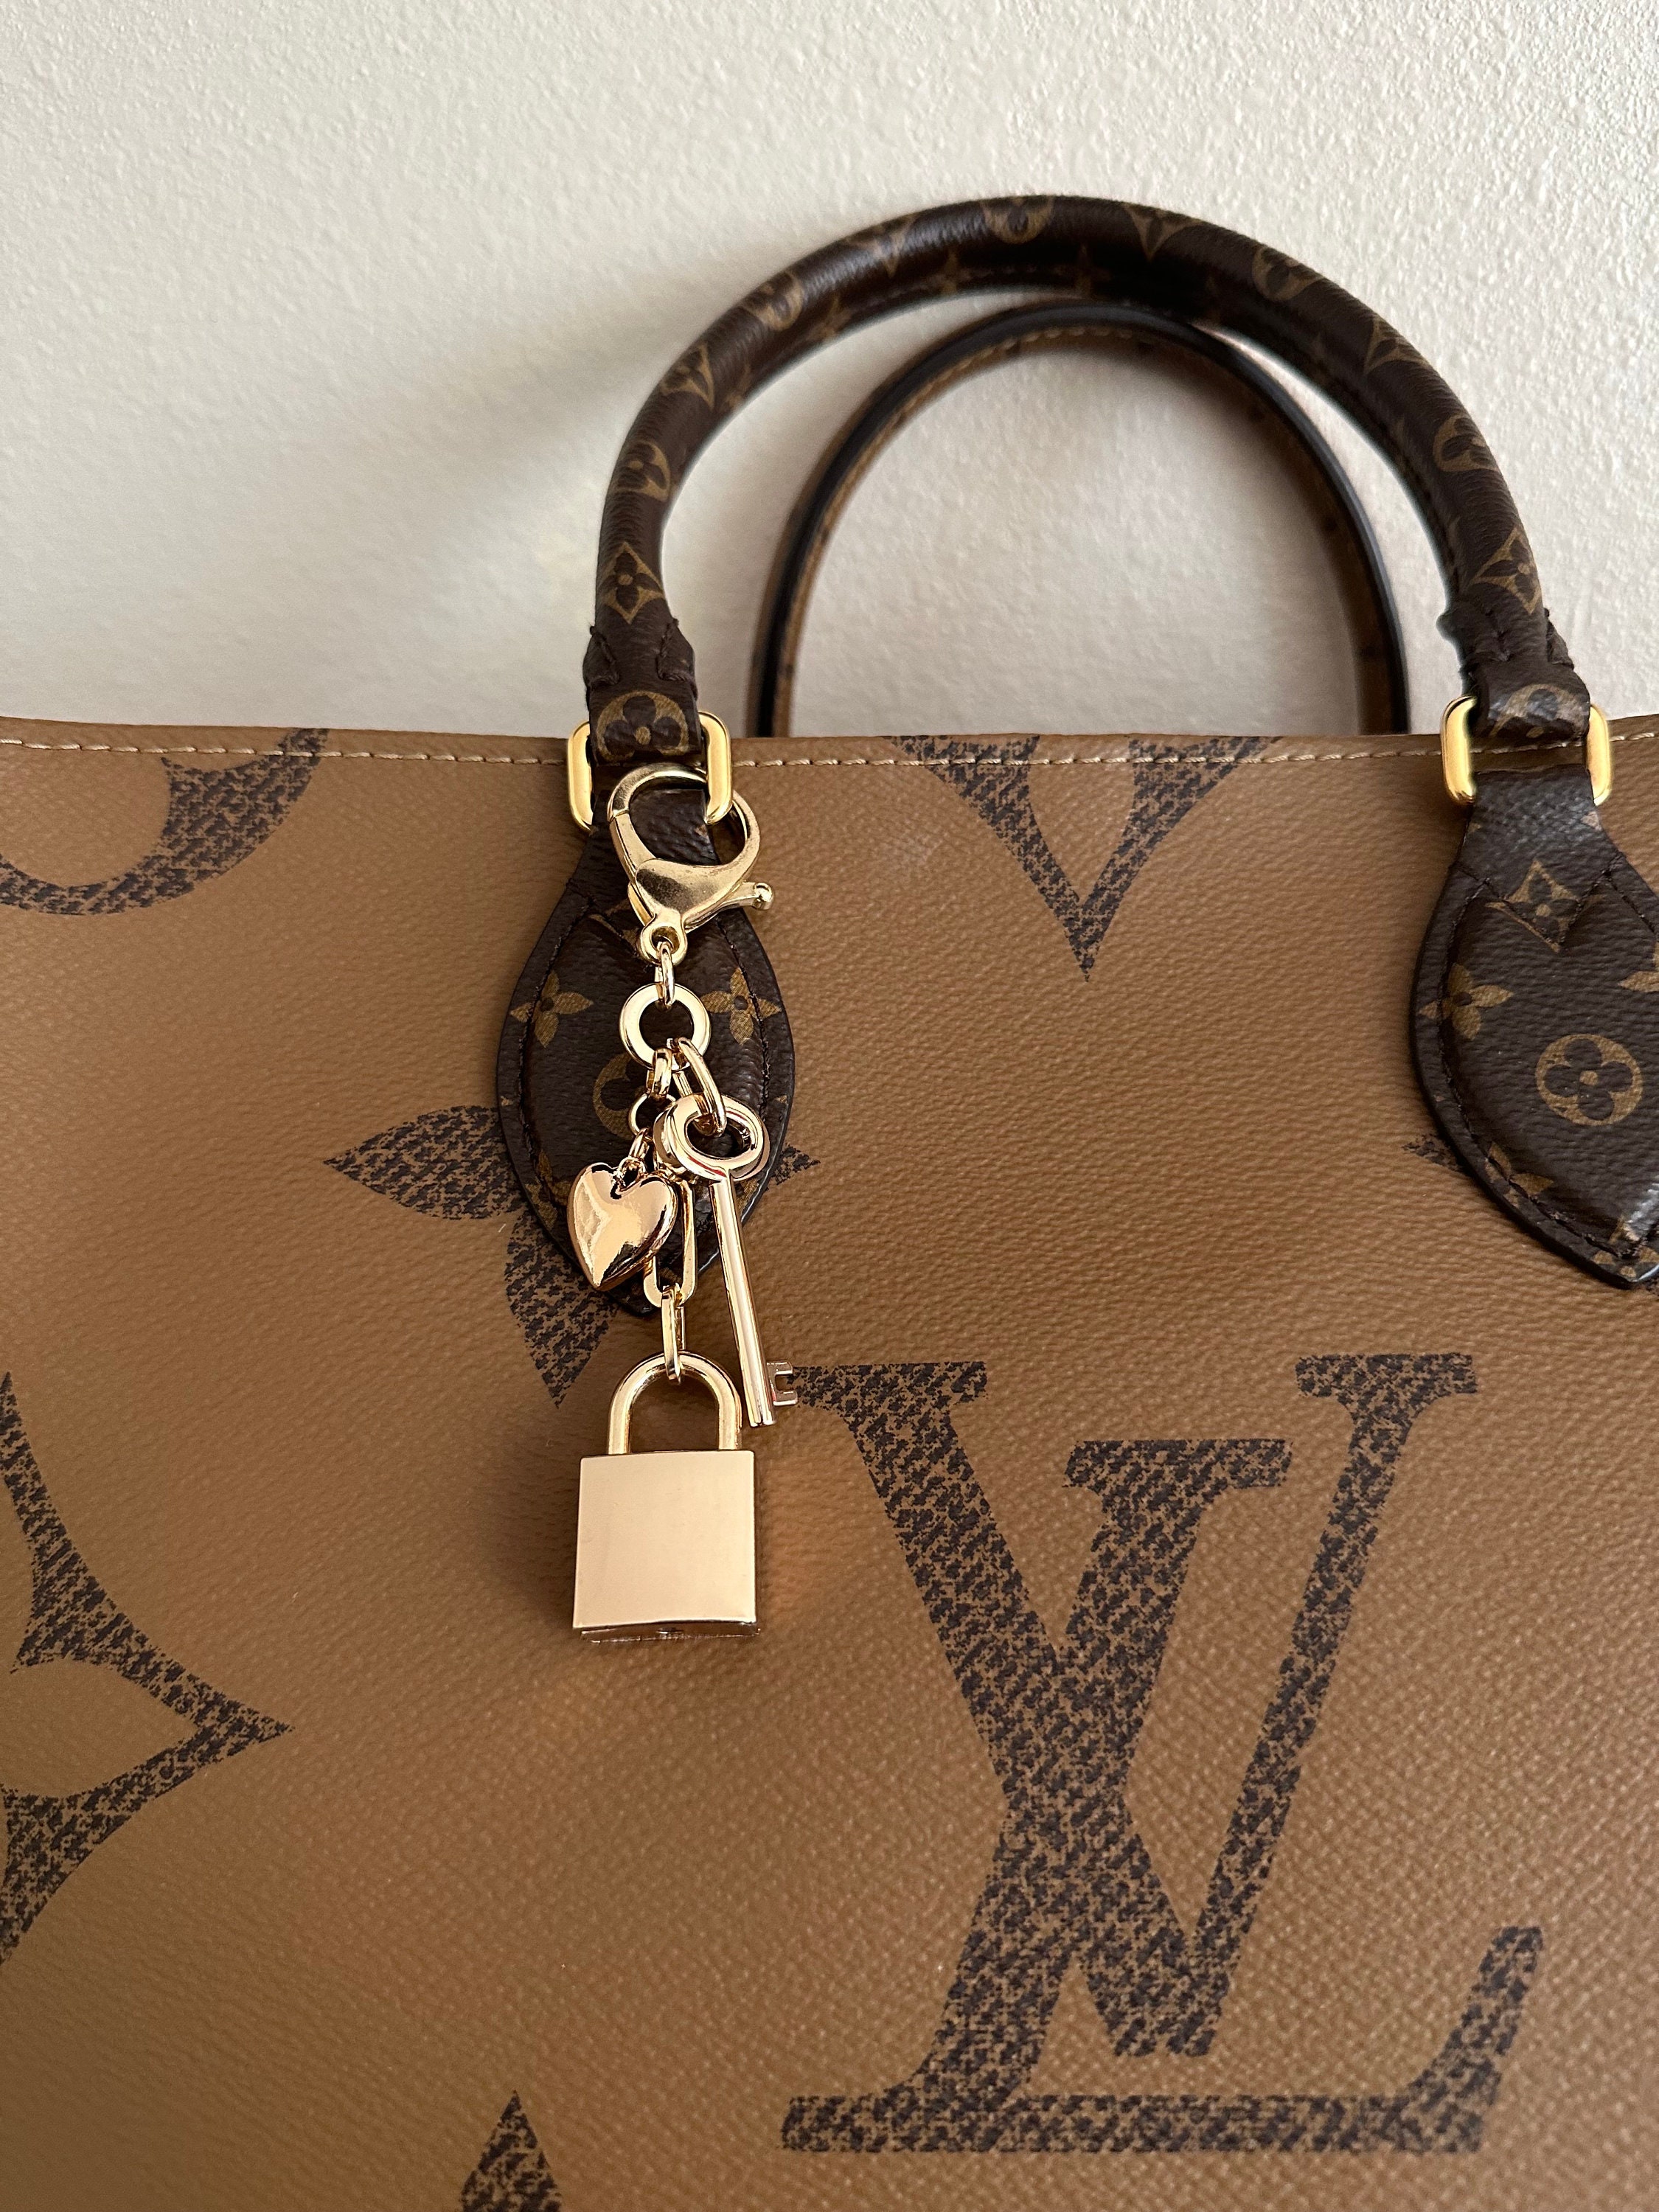 louis vuitton bag with lock and key